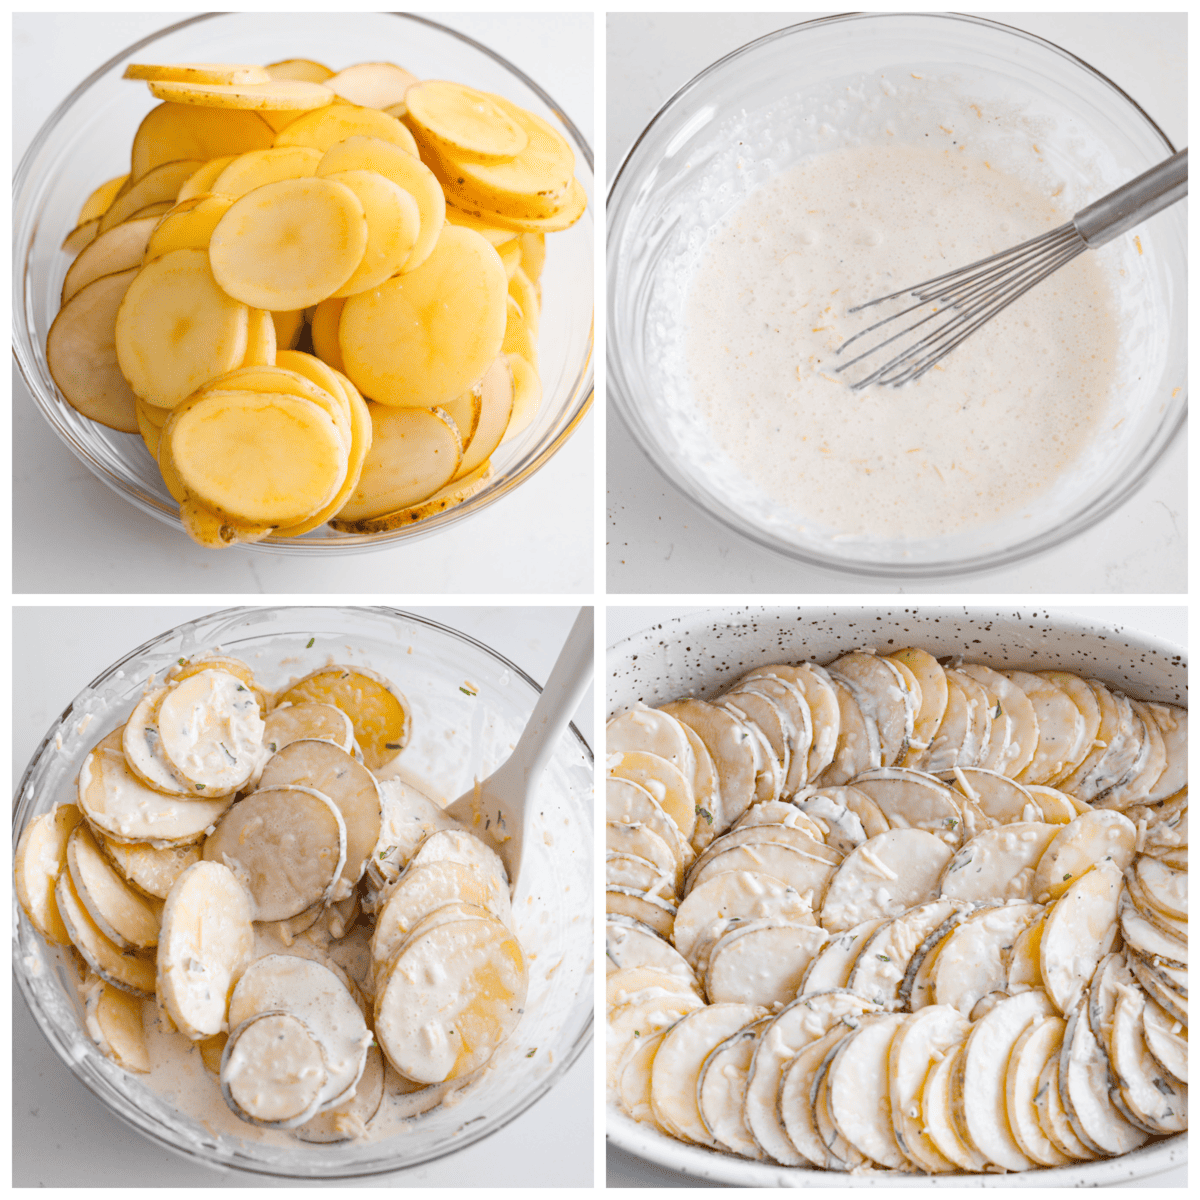 First process photo of sliced potatoes in a bowl. Second process photo of sauce in a bowl. Third process photo of sauce mixed with potato slices. Fourth process photo of potatoes layered in a baking dish.